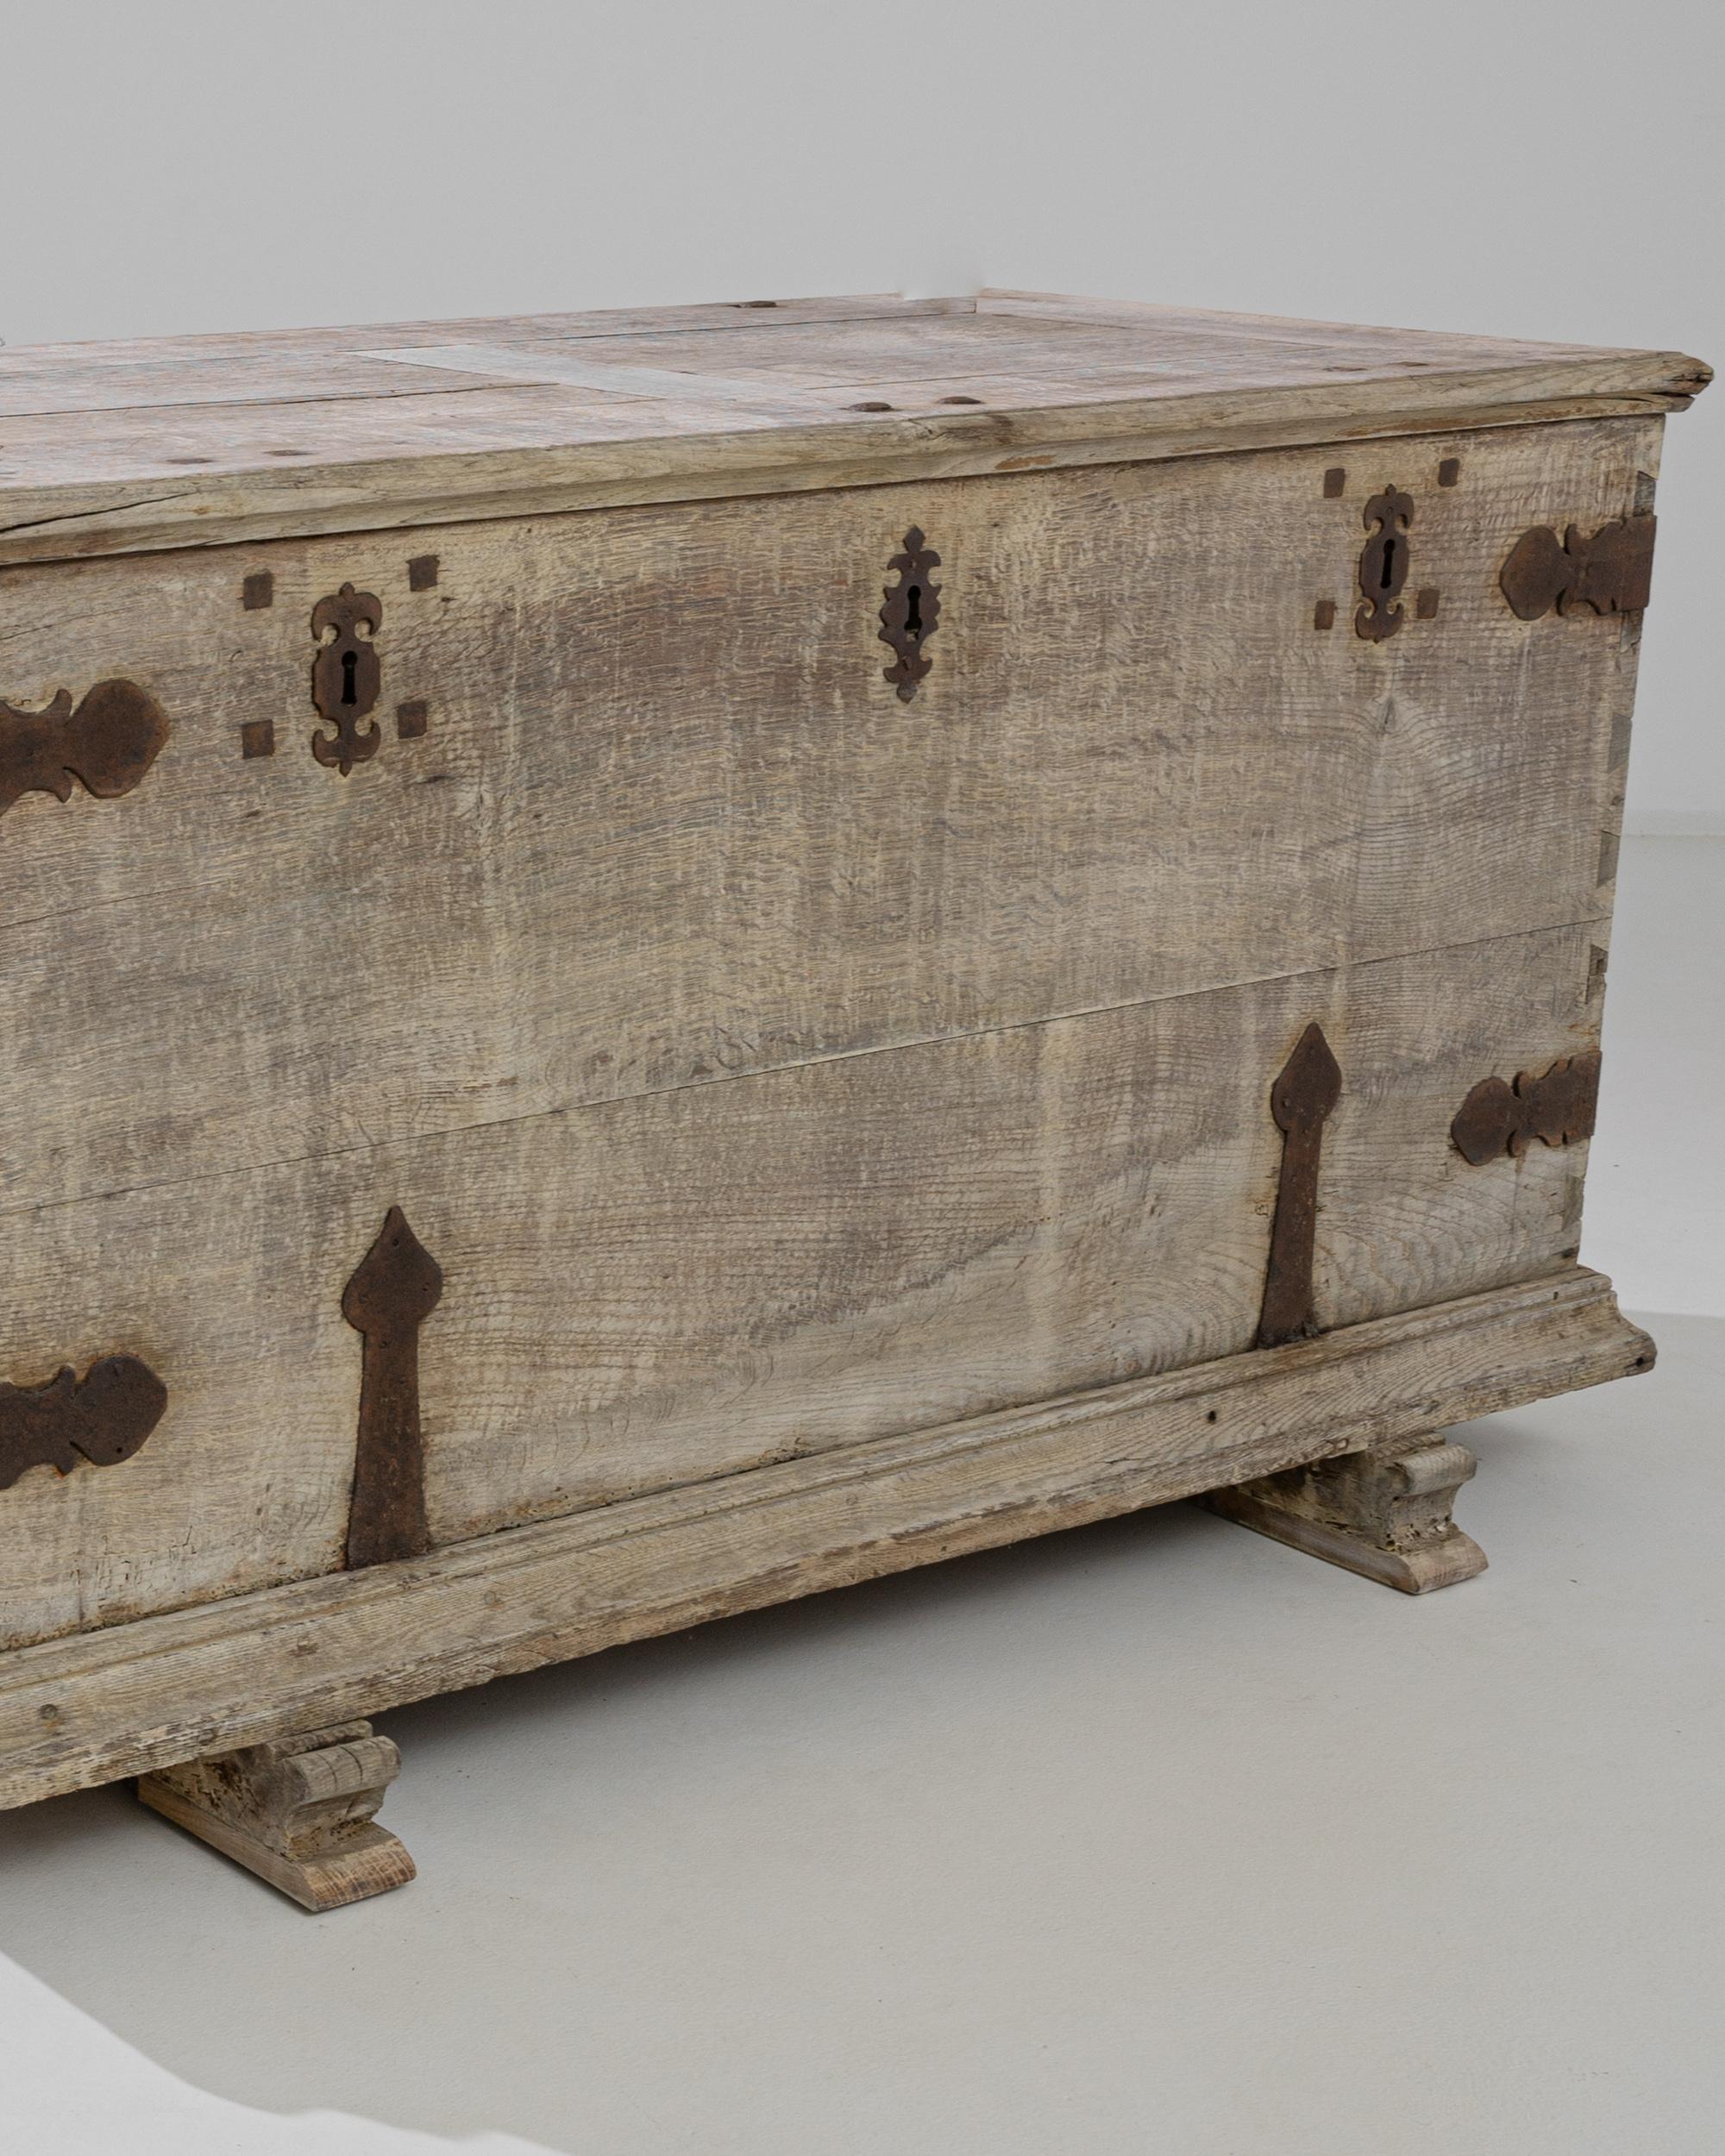 A bleached oak trunk from France, produced circa 1760. A gorgeous antique trunk in pale oak: a big box constructed with dovetail joints, held together with iron braces that add a flourish as they wrap around the corners. This piece features an